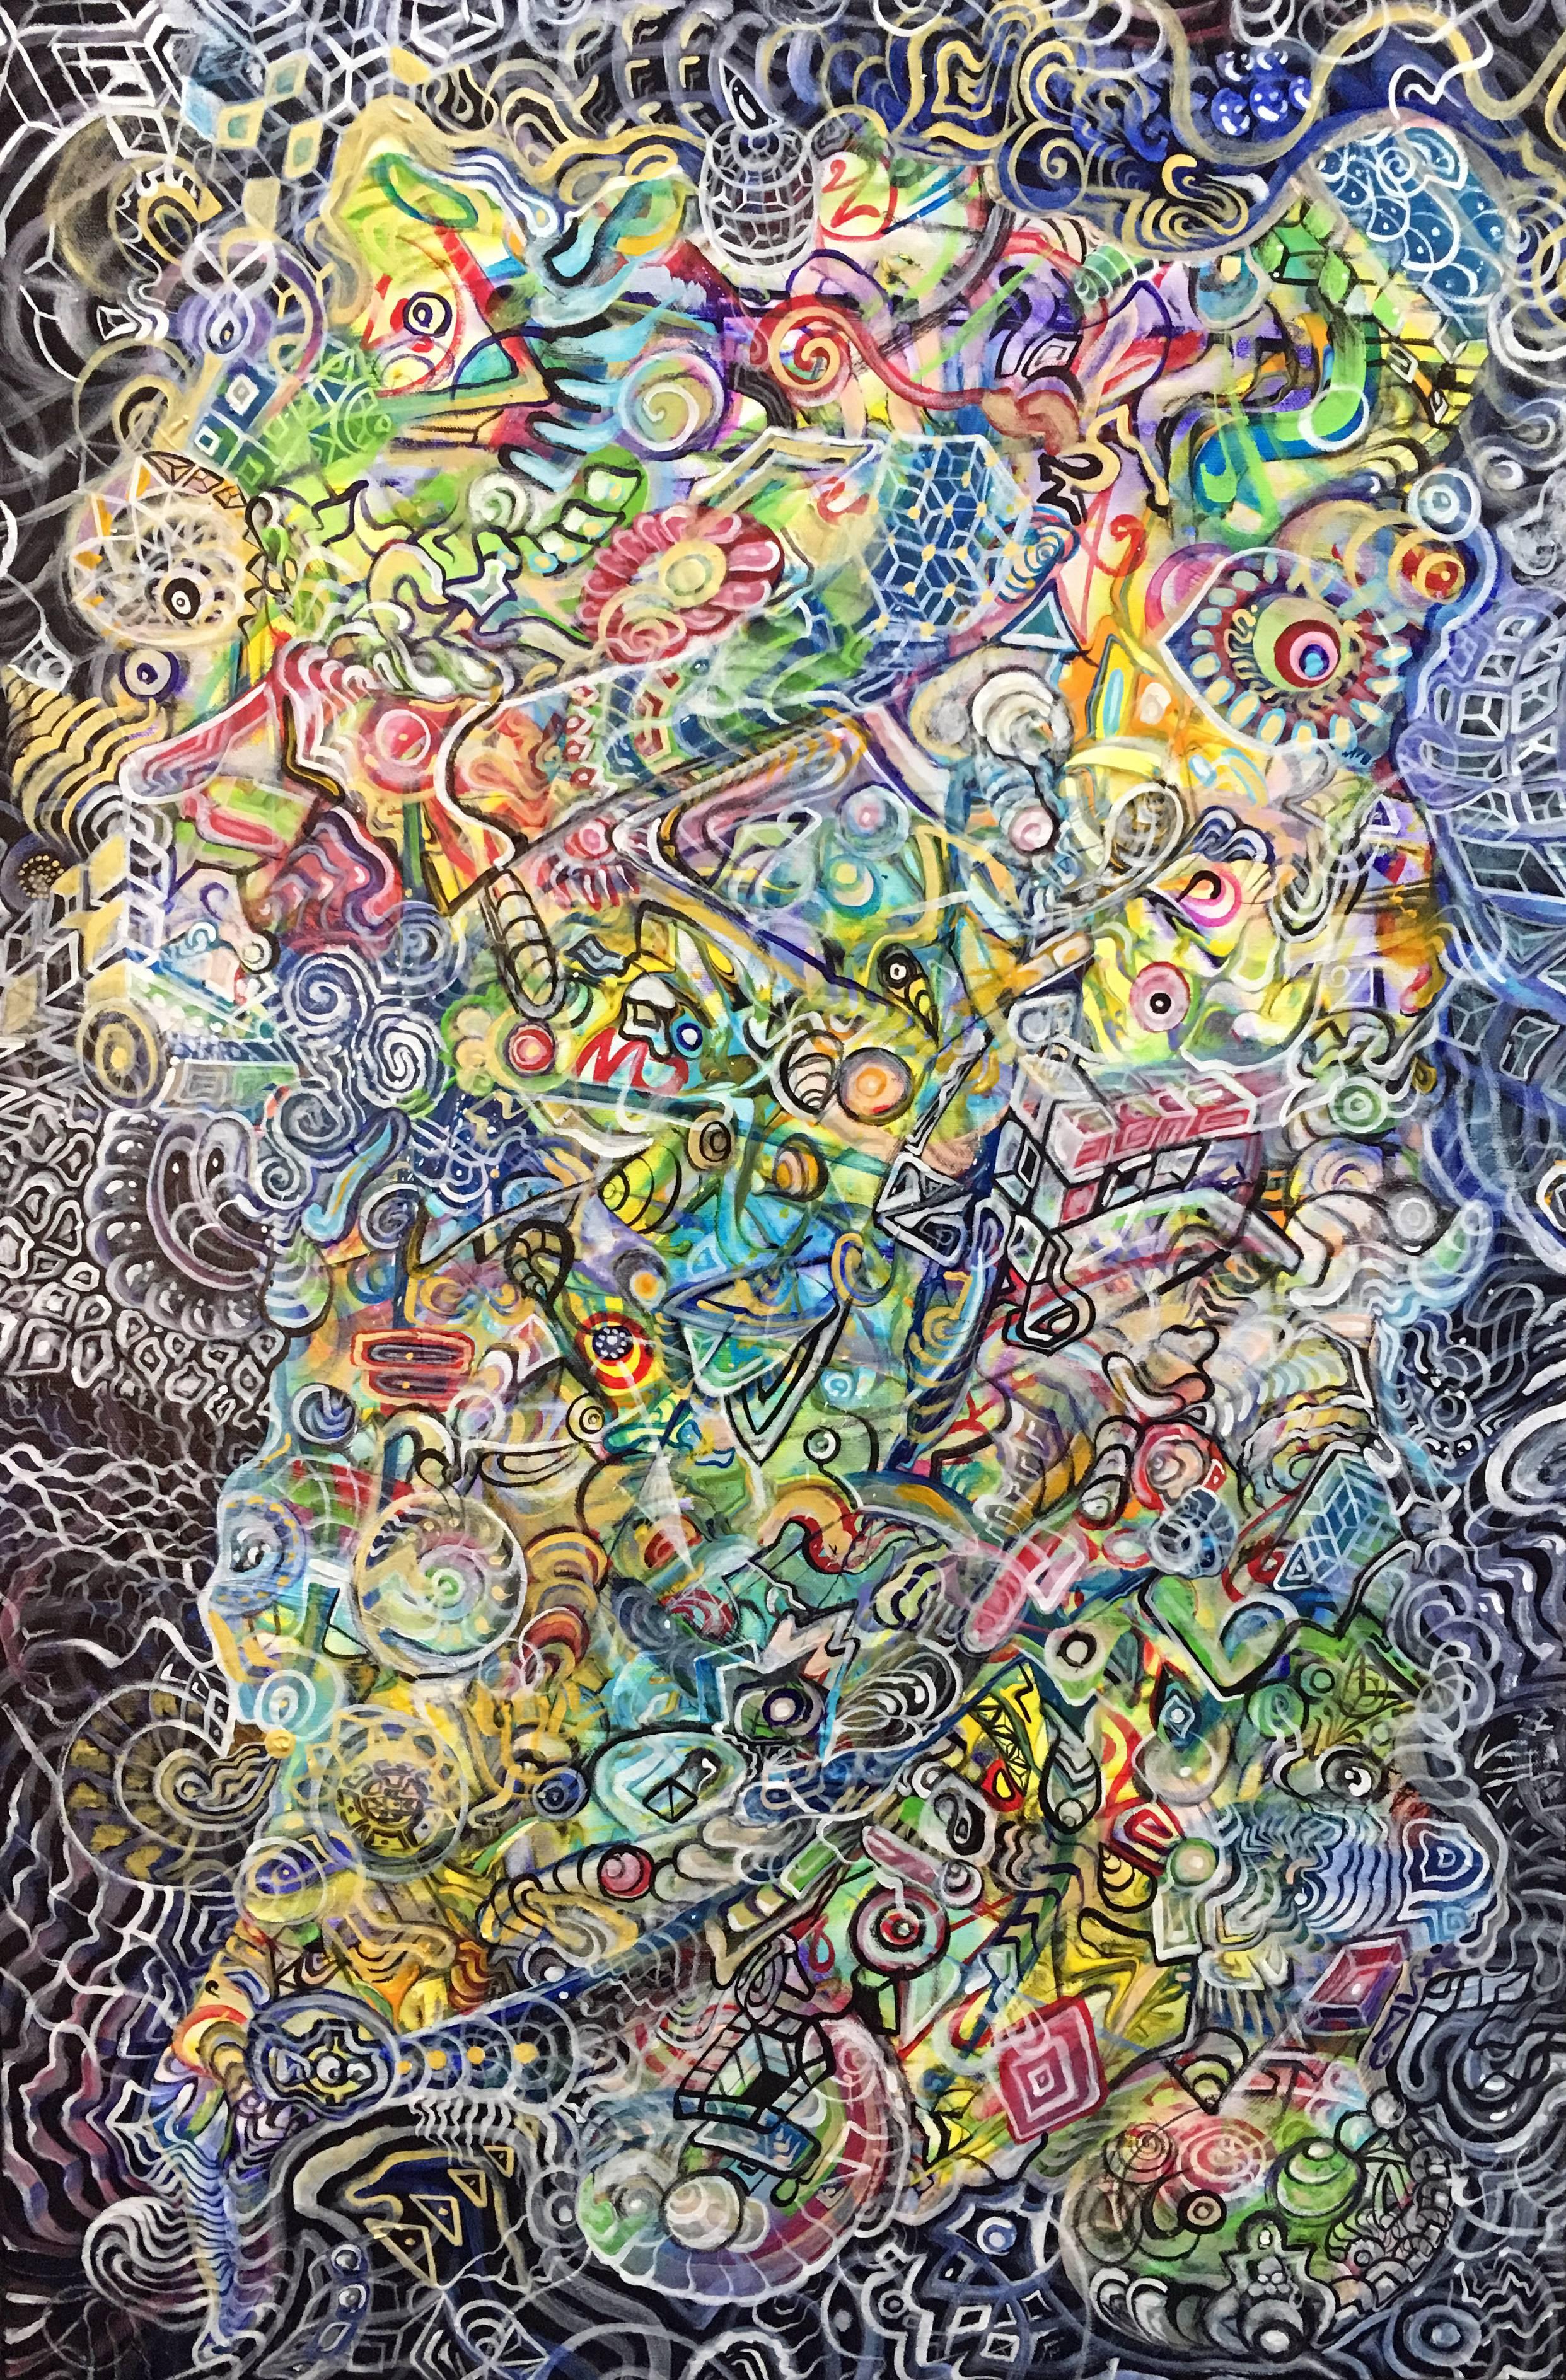 Ethan Meyer’s work is an obsession with densely intricate patterns that map the inner landscapes of consciousness. As the viewer attempts to chart the patterns, the overall effect is of a space that is both rhythmic and organic. Using markings that